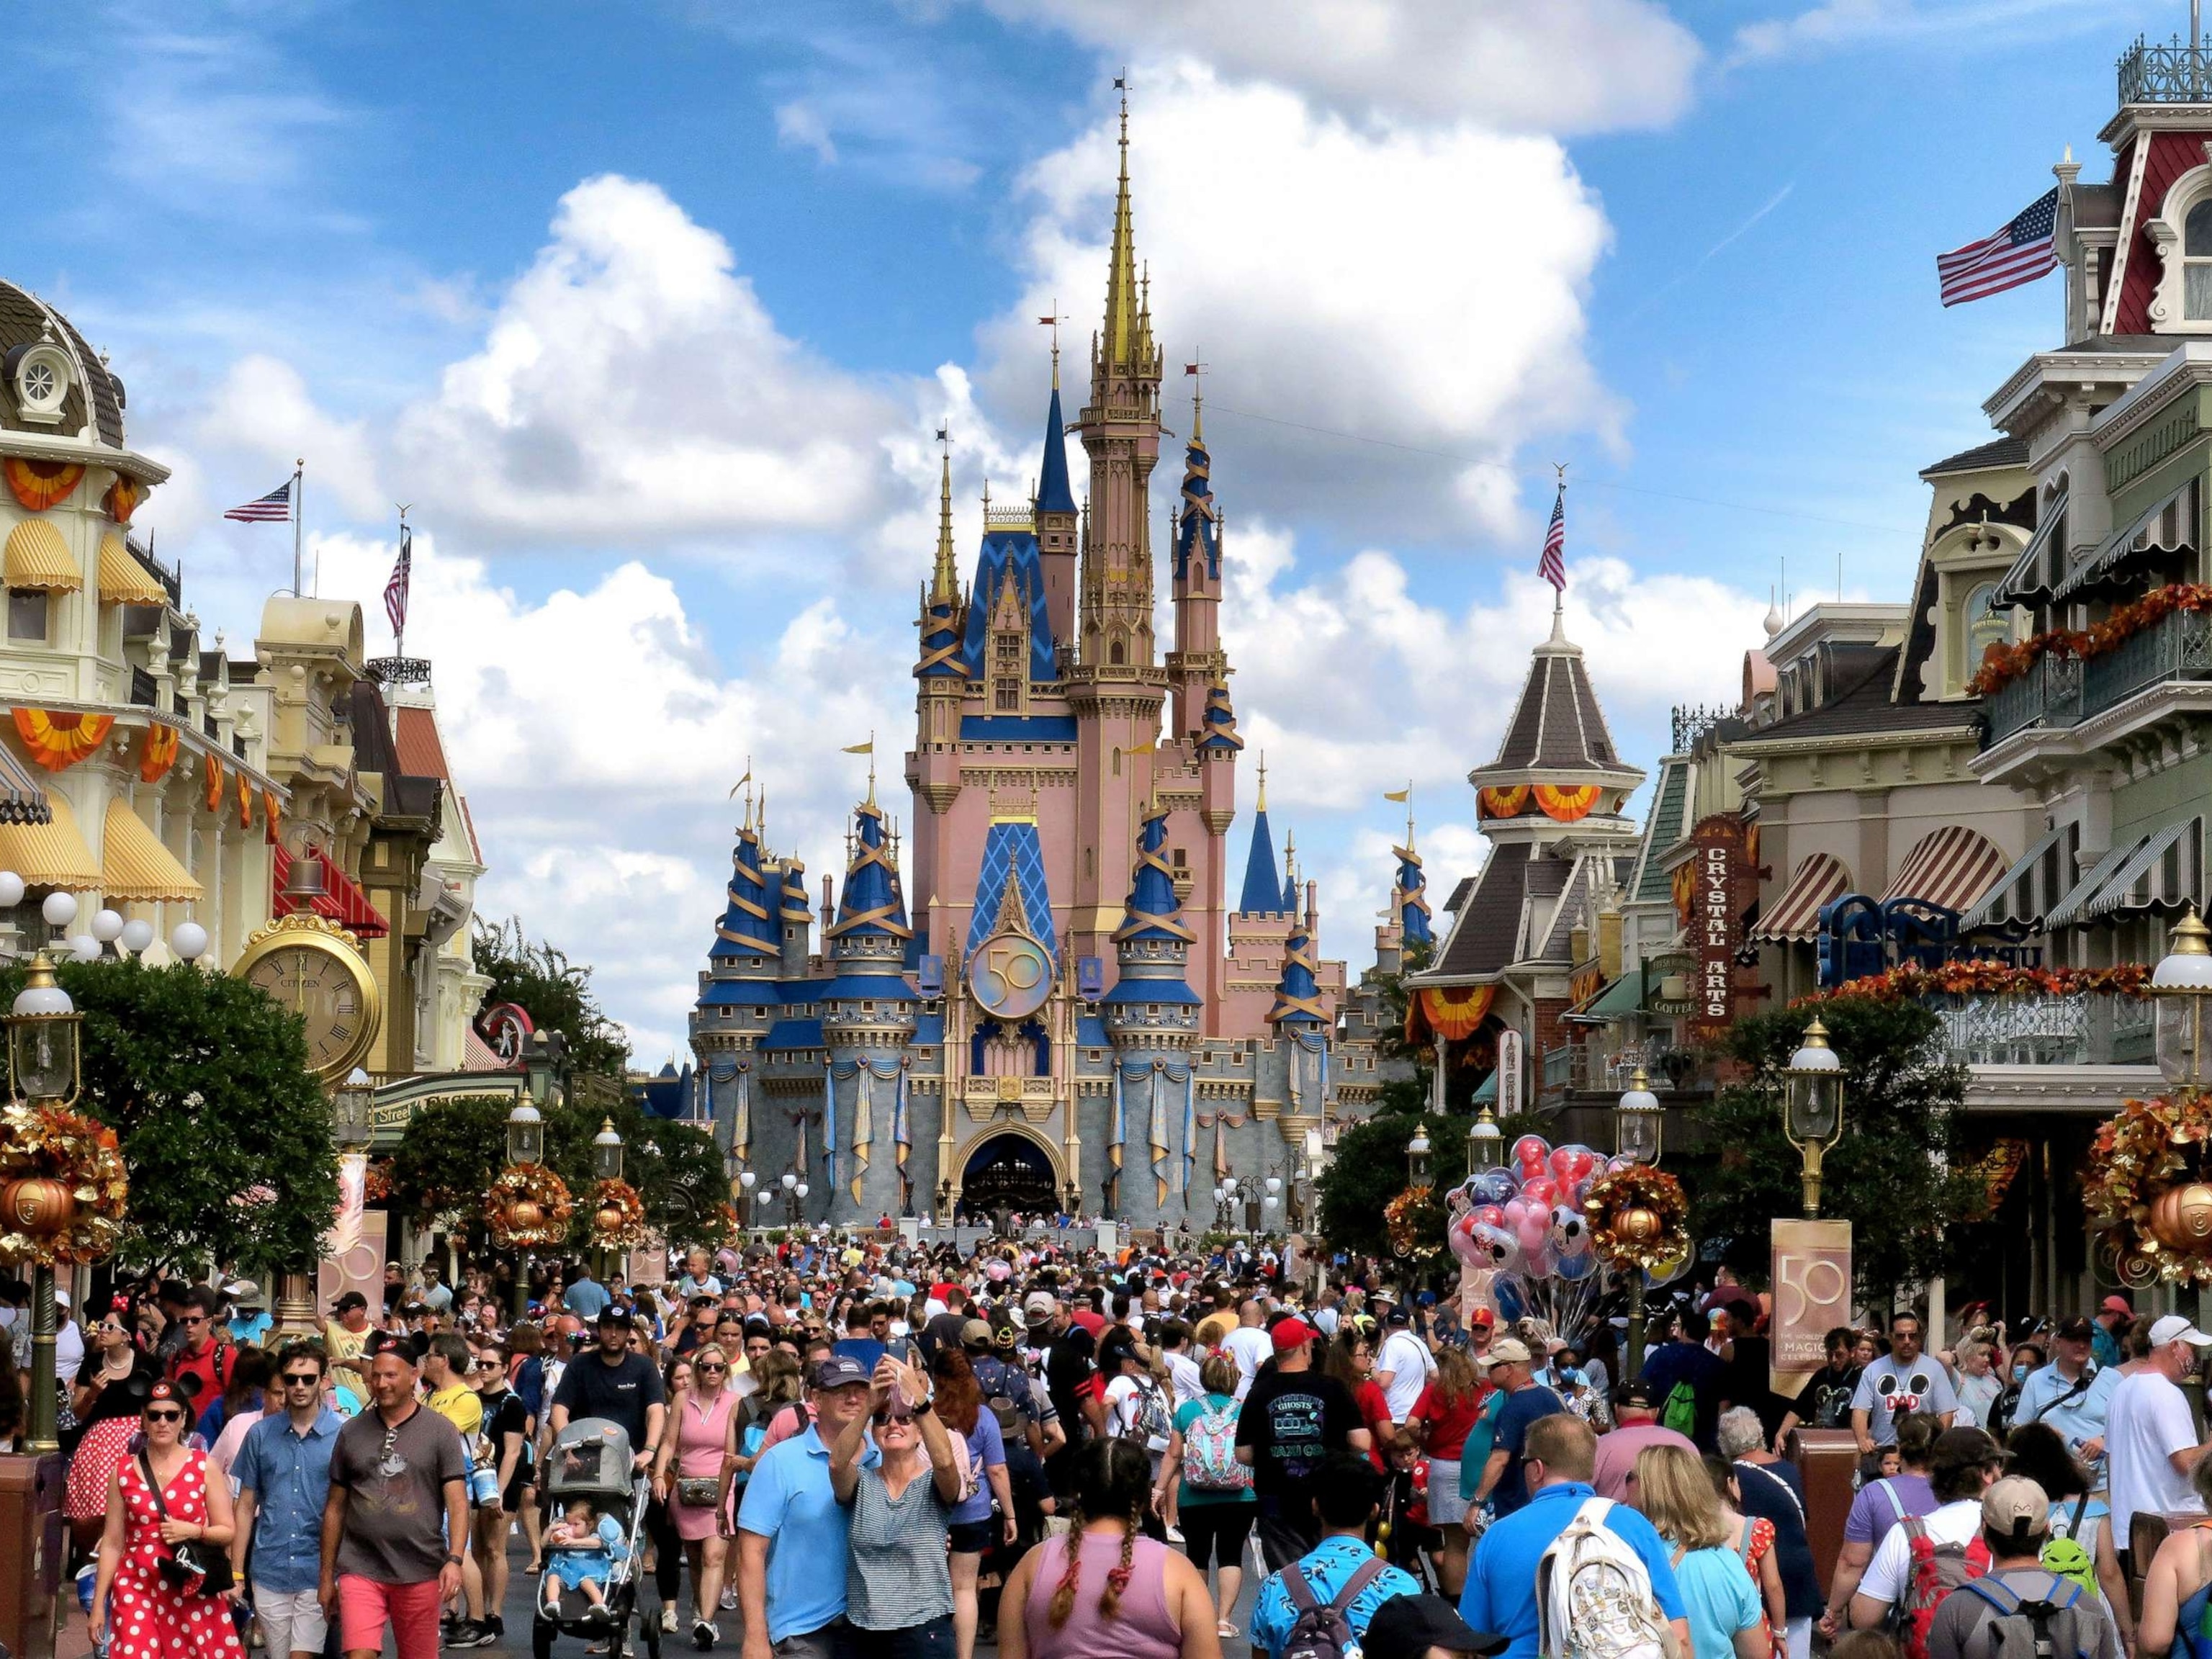 PHOTO: Crowds in front of Cinderella Castle at the Magic Kingdom on the 50th anniversary of Walt Disney World, in Lake Buena Vista, Fla., Oct. 1, 2021.